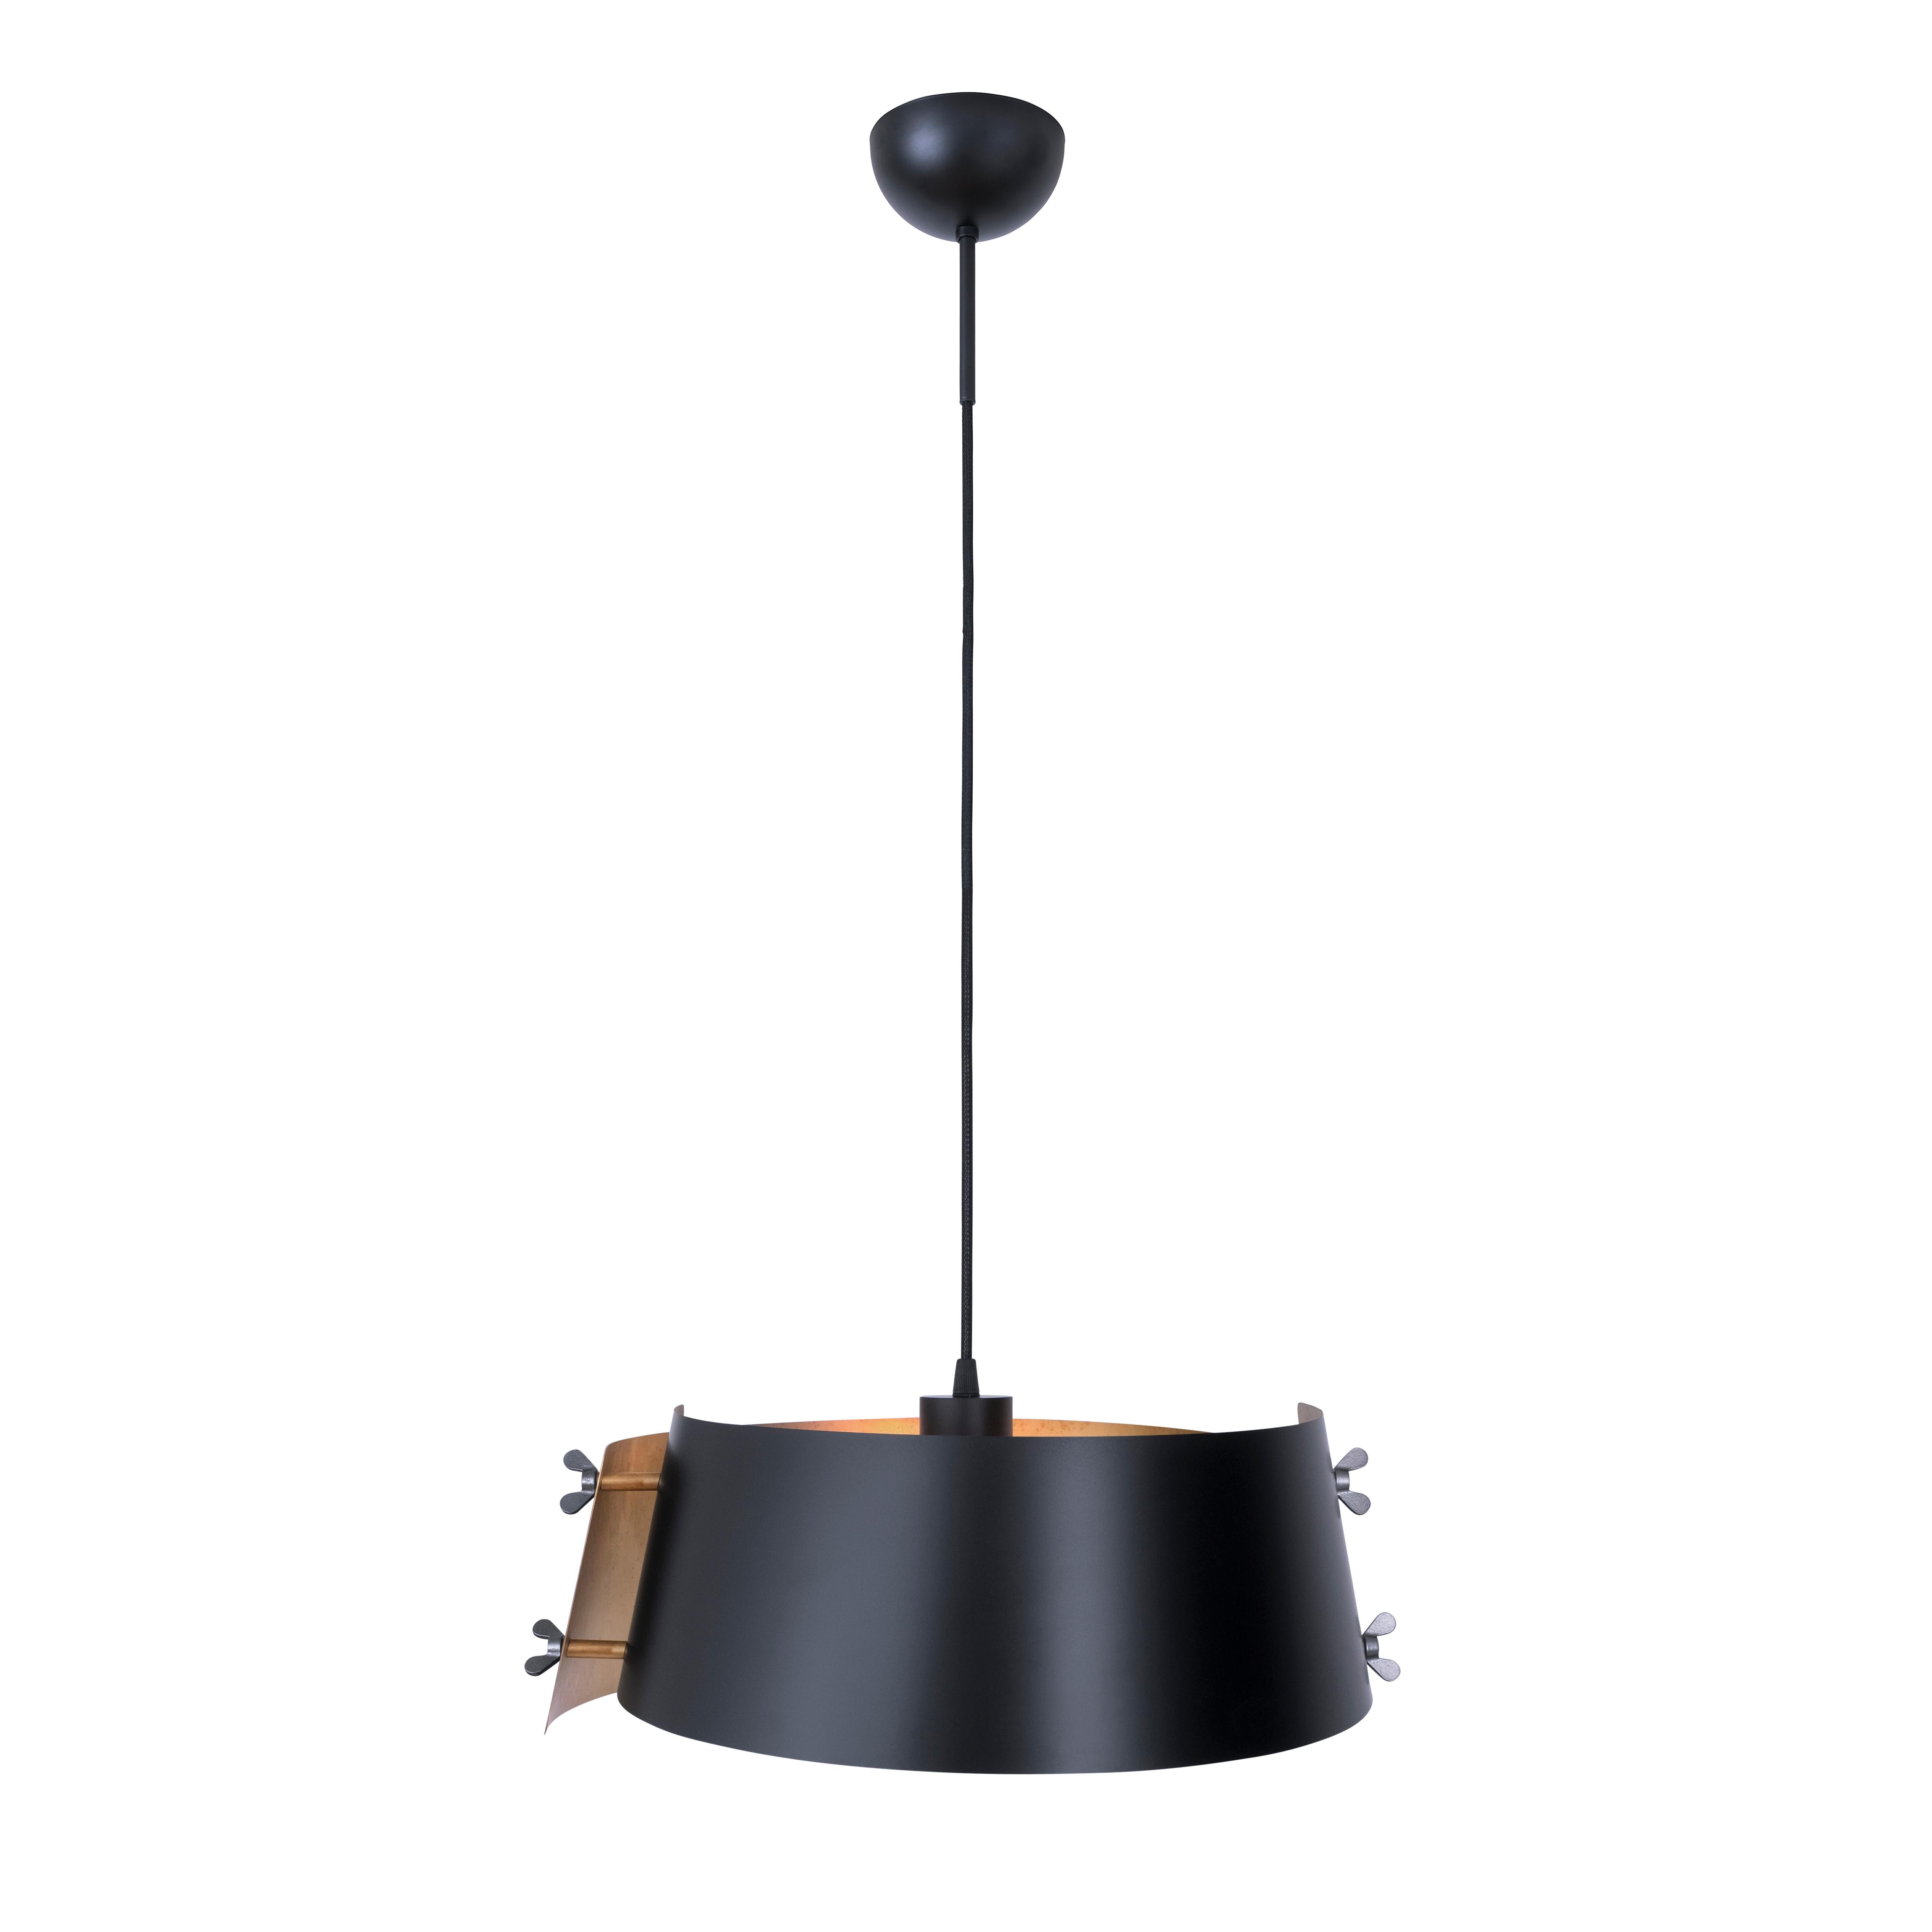 Pendant lamp manufactured by Konsthantverk Tyringe

Glipa
D. 410 mm
H. 180 mm
Max 40 W E27
3485-8 Black/raw brass

The lamps are wiring with standard Europe wiring.


Glipa is a ceiling lamp designed by Jesper Ståhl. The lamp is made of